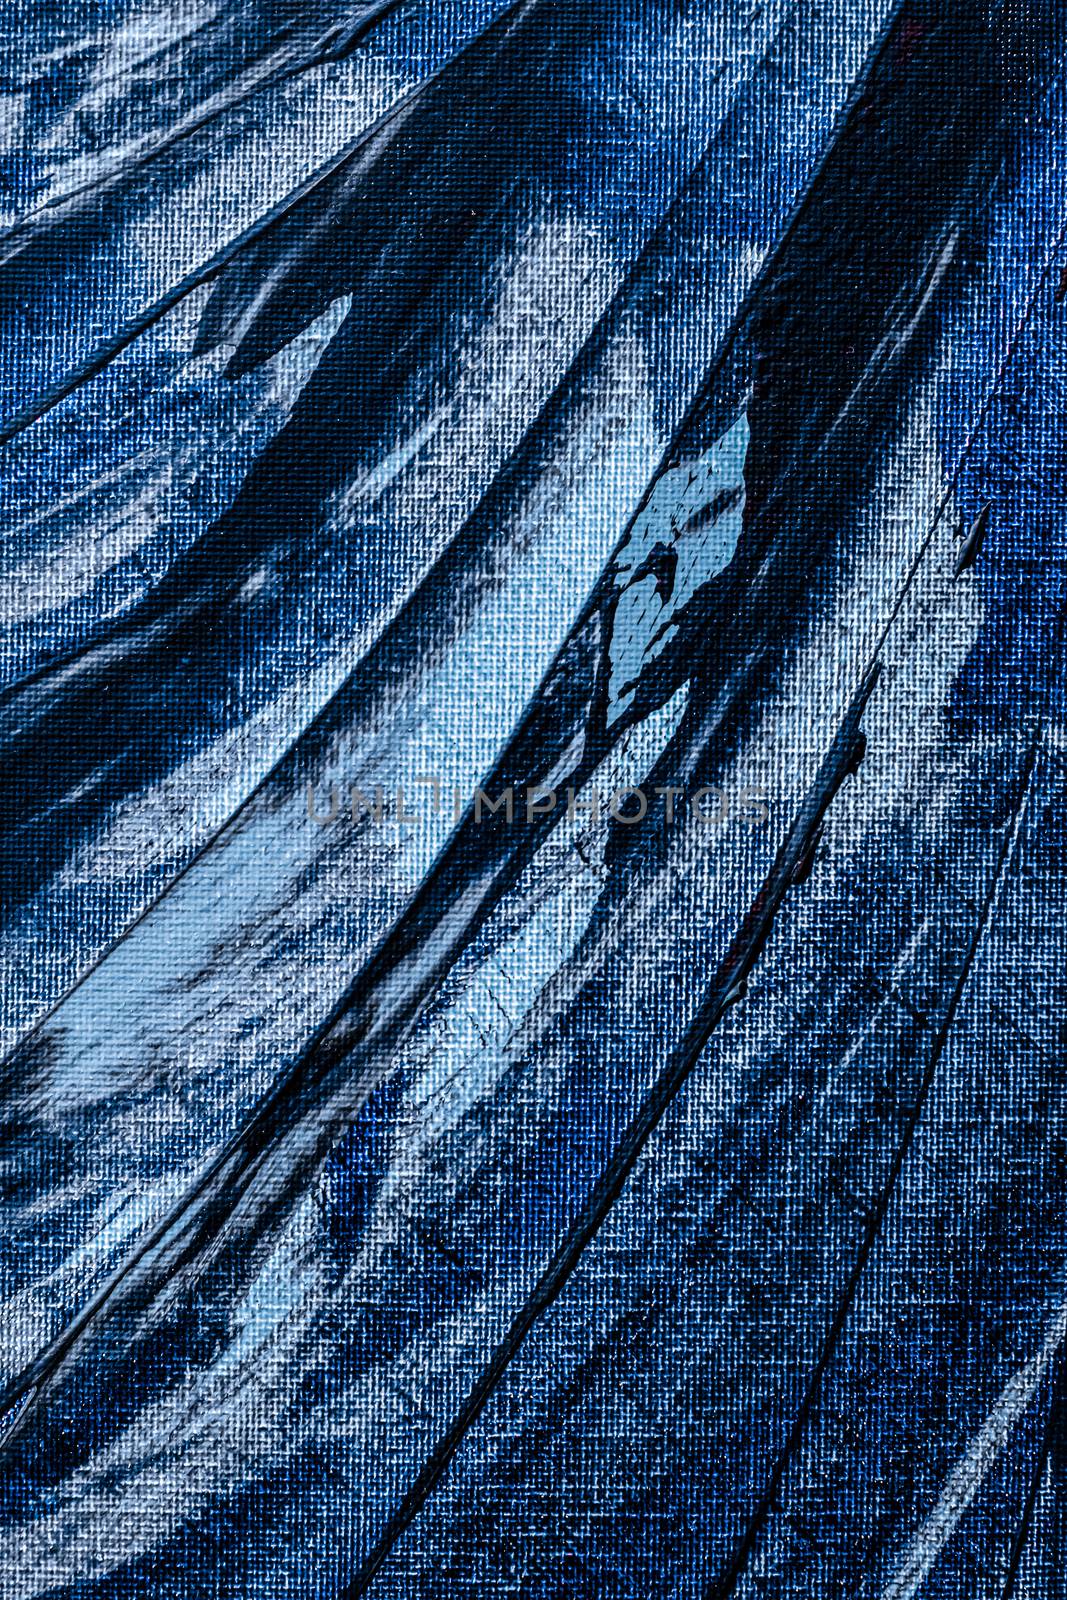 Blue abstract background, painting and arts